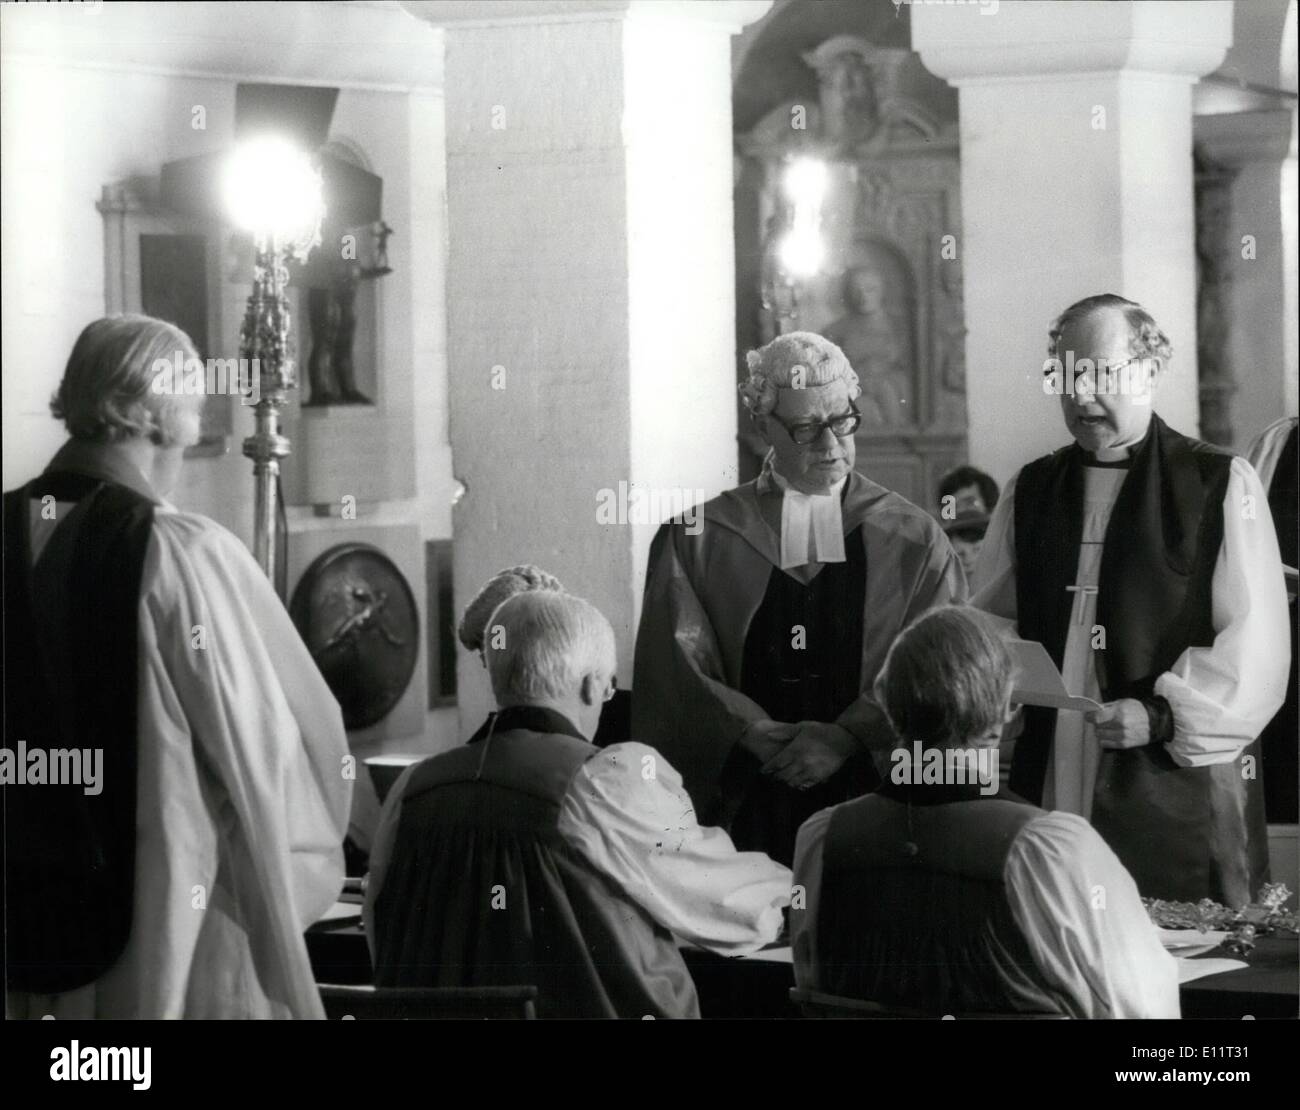 Feb. 02, 1980 - New Archbishop of Canterbury Robert Runcie is confirmed at St. Paul's Ceremony; The new Archbishop of Canterbury, Rt Rev Robert Runcie, was confirmed in his appointment in a quaint ritual in the crypt of St. Paul's Cathedral today. Photo Shows The new Archbishop of Canterbury, RT Rev. Robert Runcie being confirmed in the crypt of St. Paul's today. Stock Photo